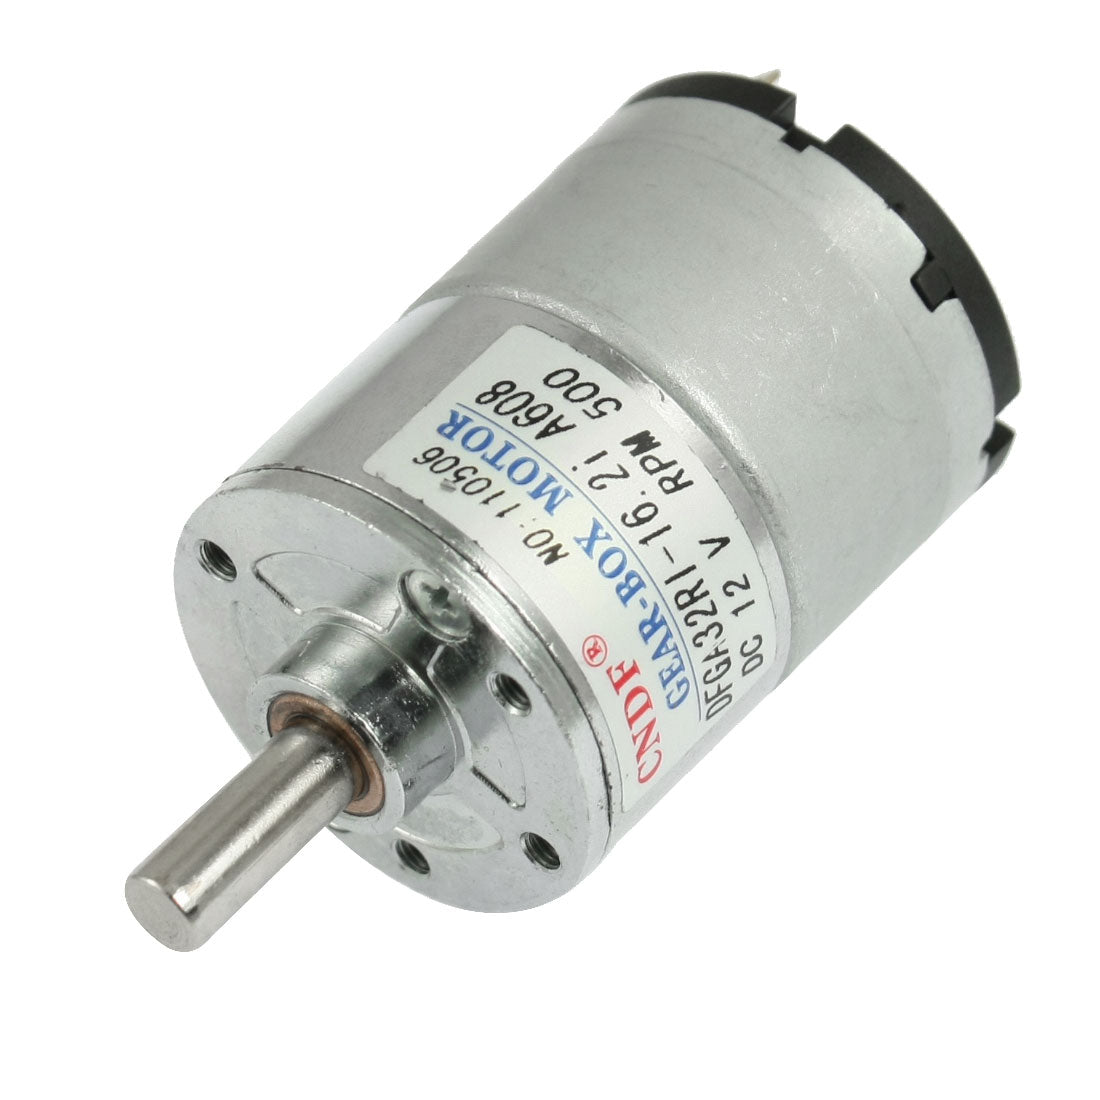 uxcell Uxcell(R) DC 12V 50mA 500RPM 0.3Kg-cm High Torque D-Shaft Permanent Magnetic DC Gear Motor